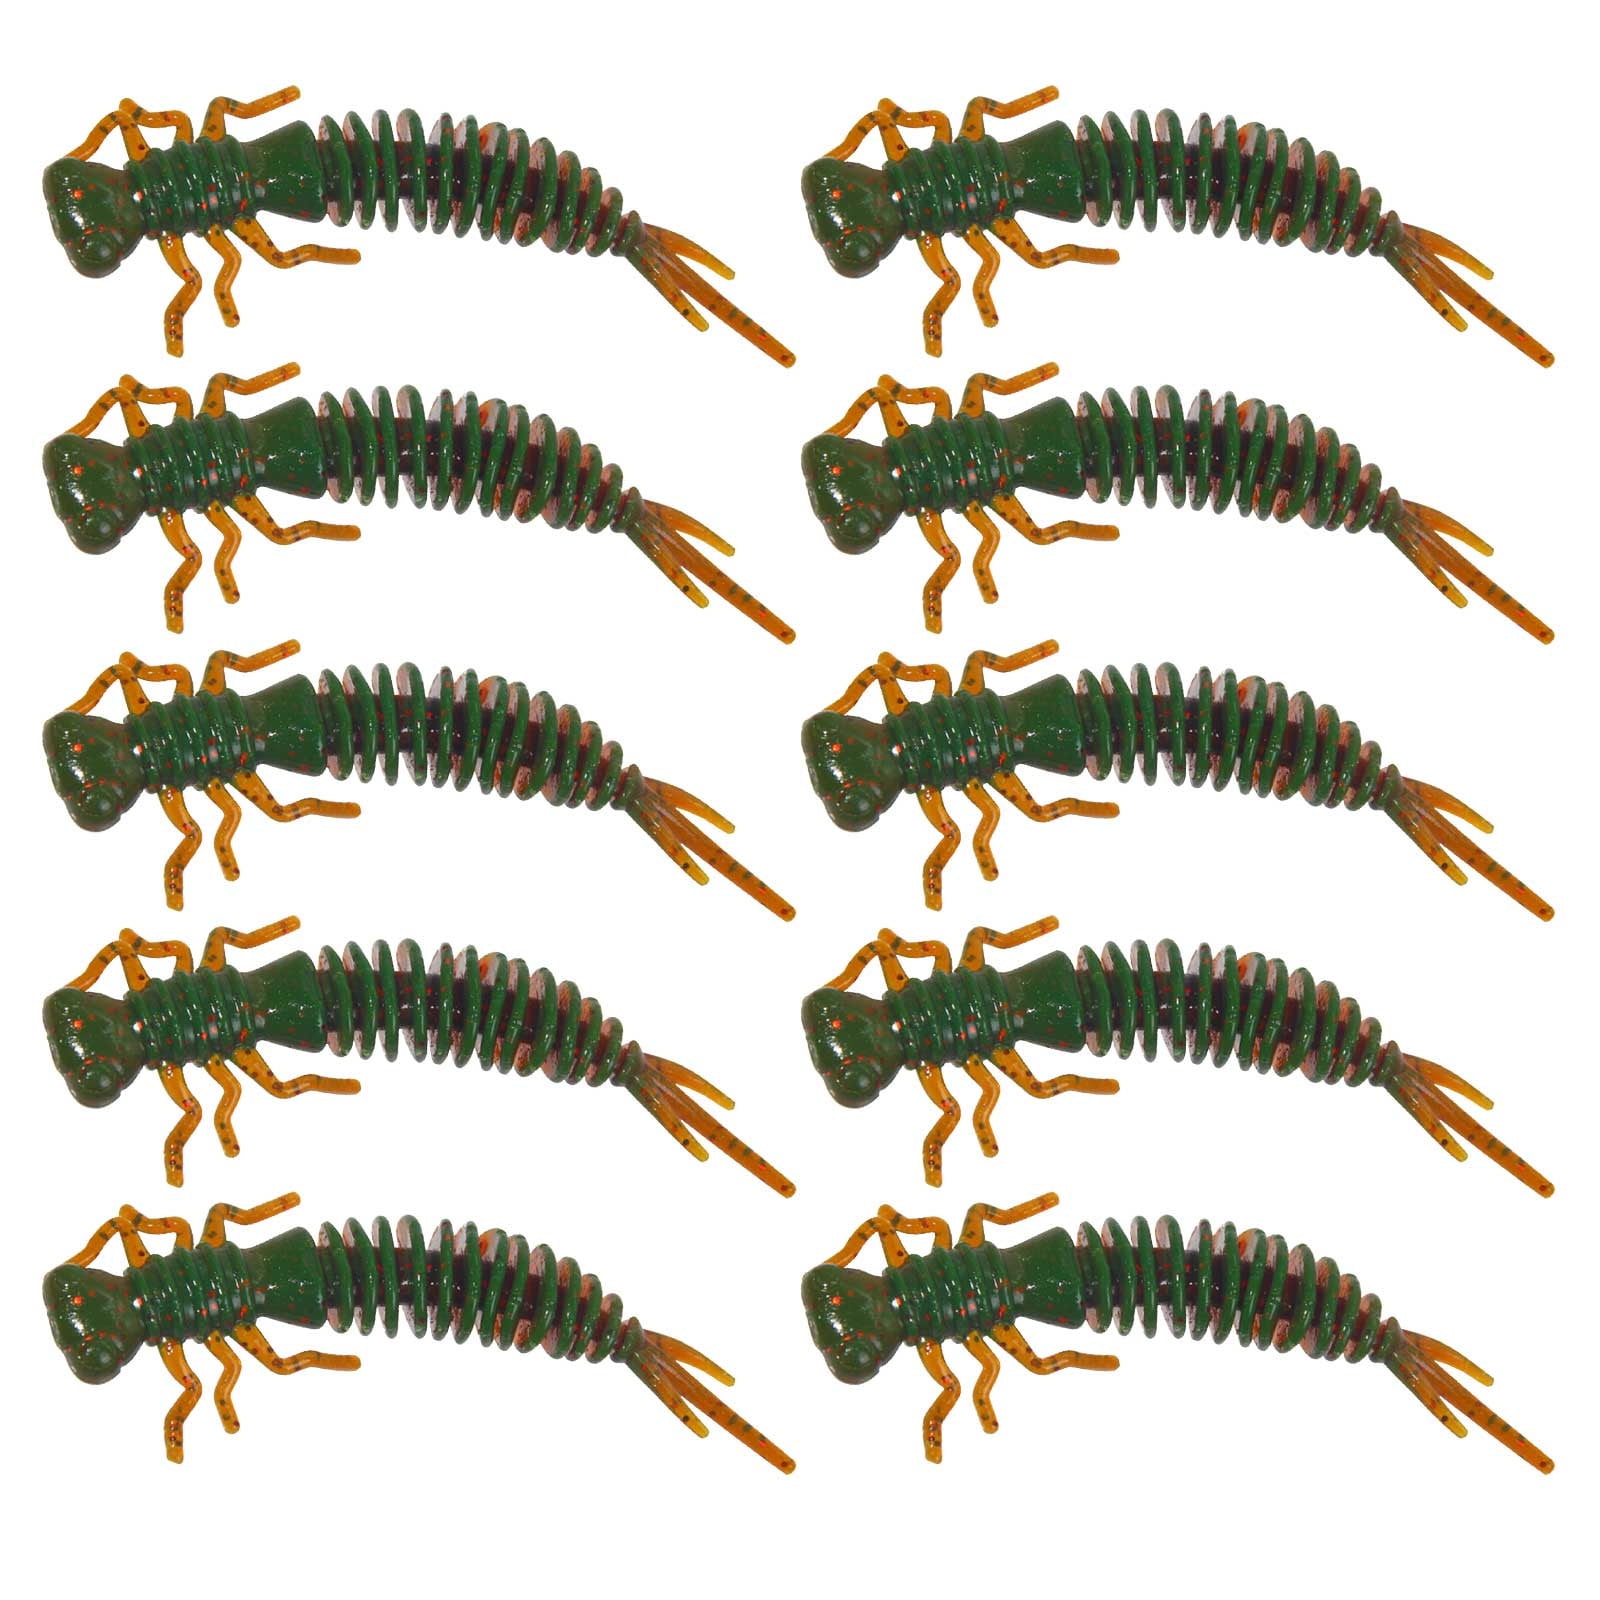 Herrnalise 10PCs Dragonfly Larva Soft Silicone Fishing Lures for Bass, Trout,  Soft Plastic Fishing Lure Sinking Deepwater Fishing Accessories for  Saltwater Freshwater 